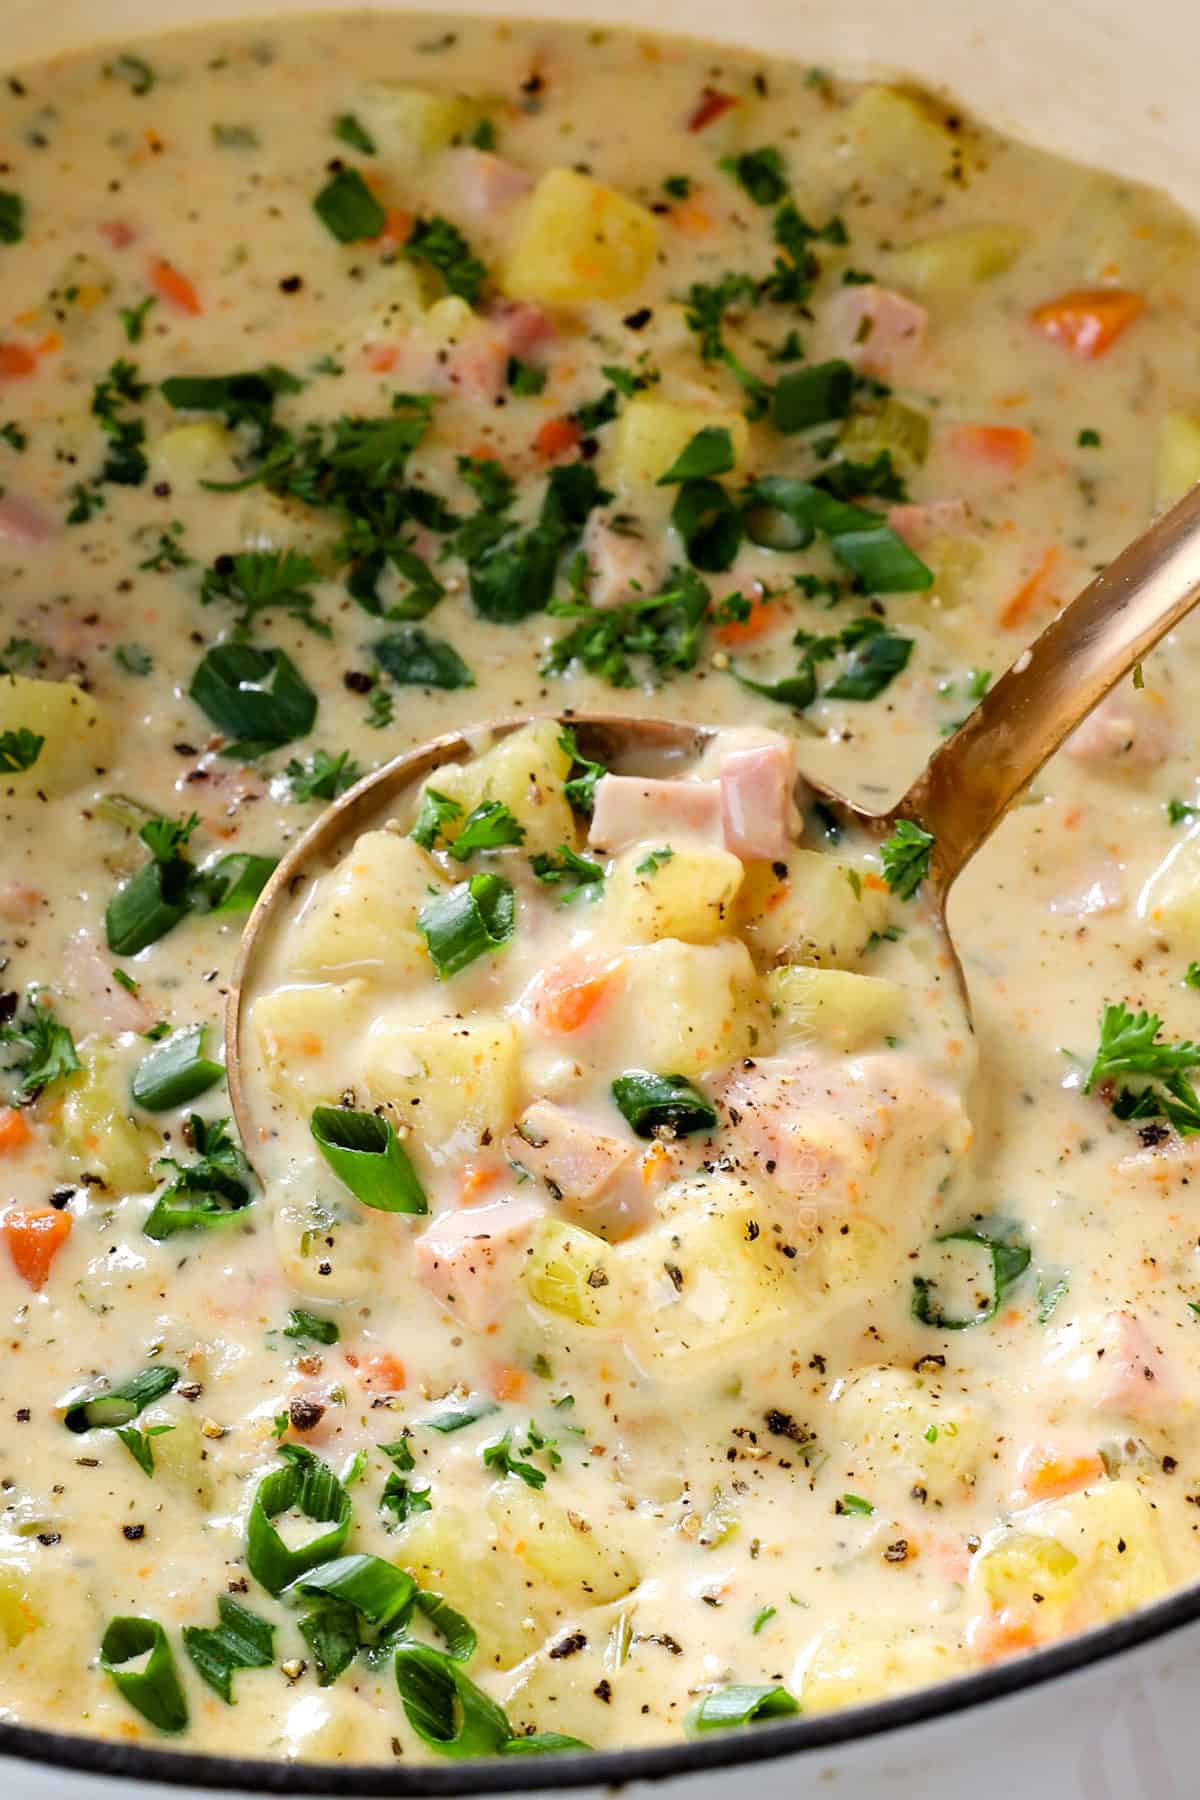 up close of ham and potato soup recipe showing how creamy it is